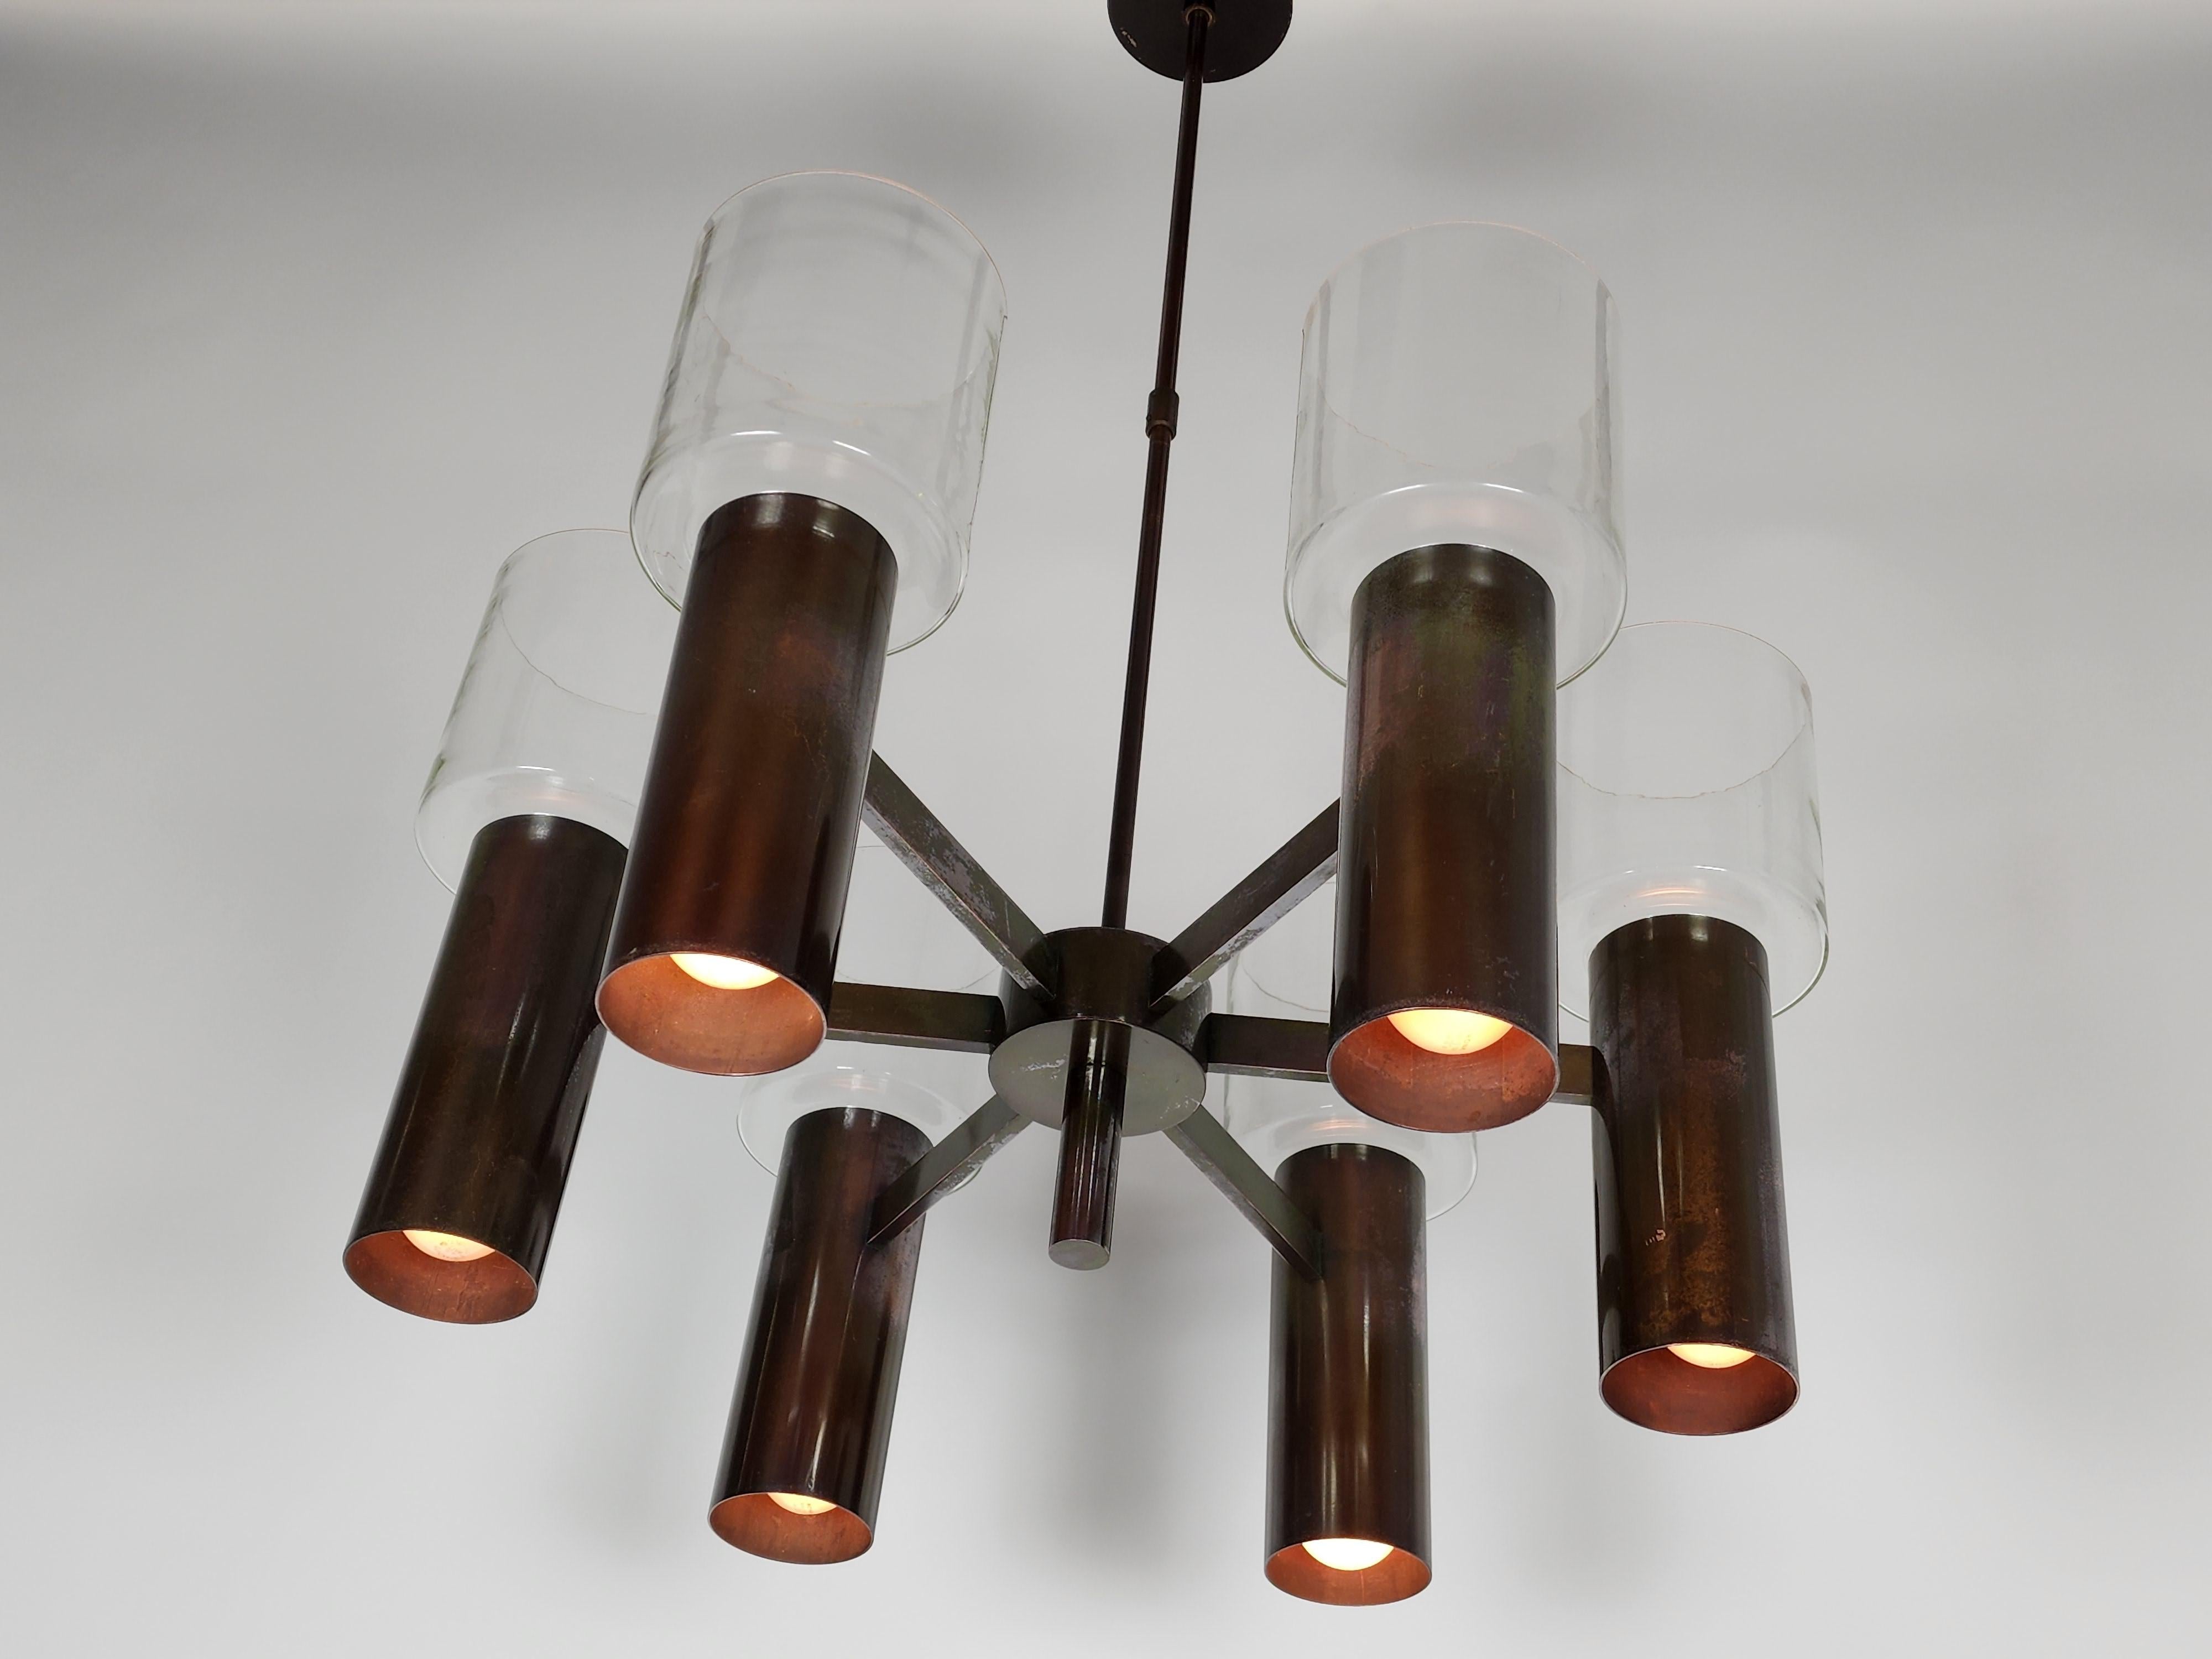 Stuart Barnes for Robert long chandelier. 

Anodized metal structure, topped by six huge mouthblowed clear glass hurricane shade.

Regular E26 North American medium size socket rated at 60 watts each.

Six upward and six downward light